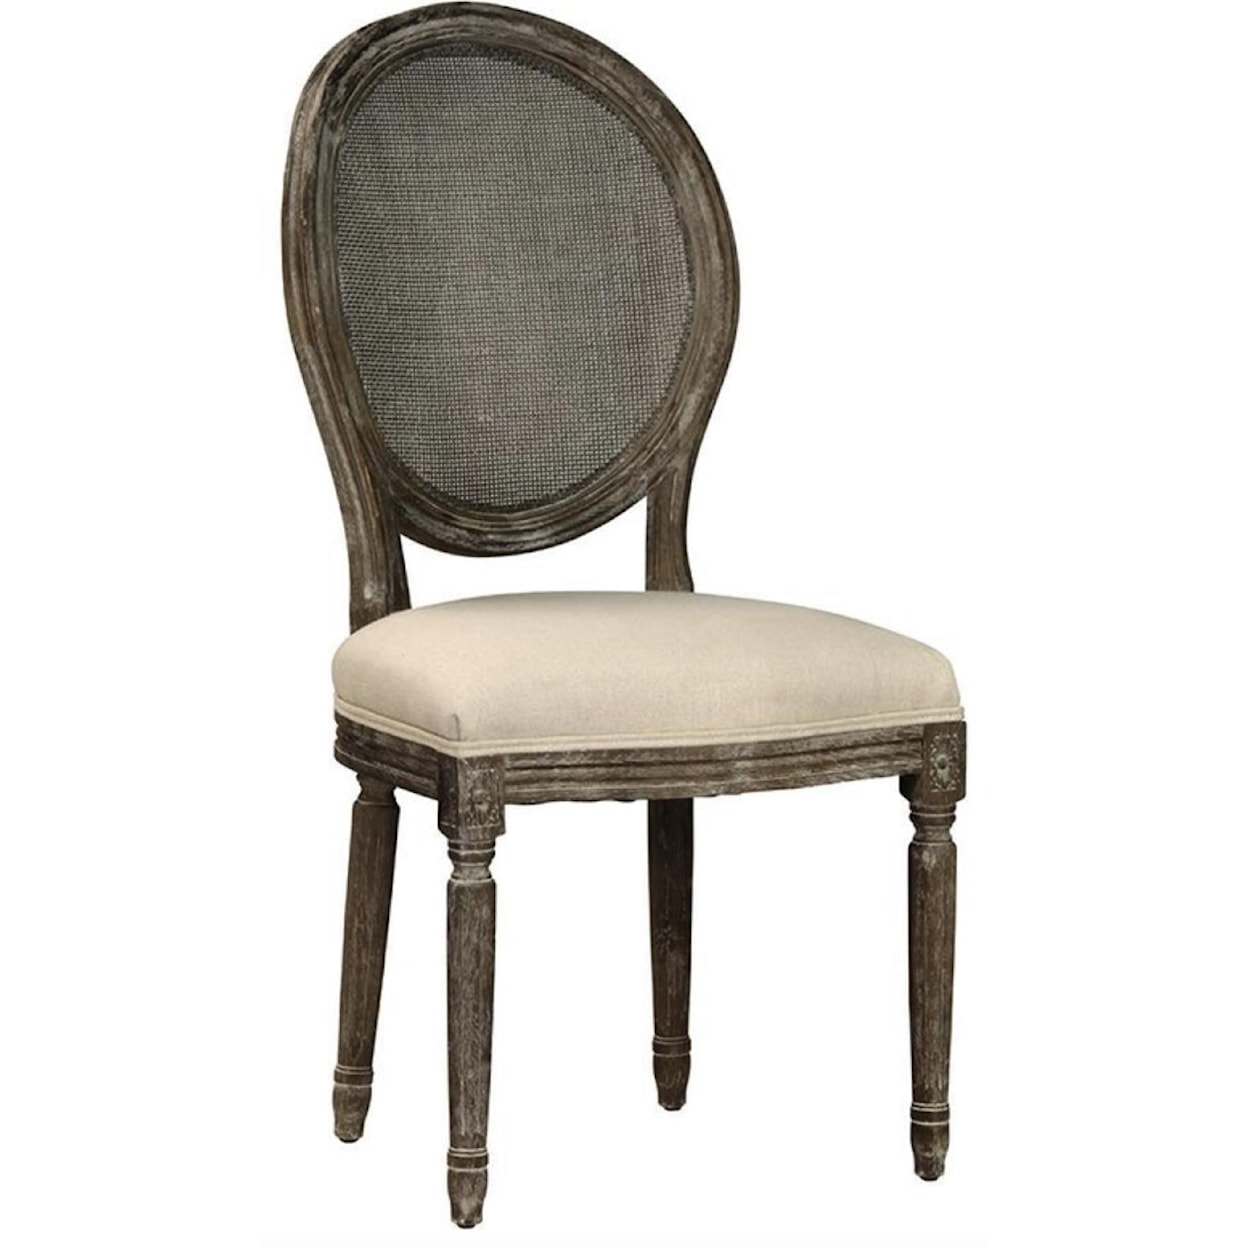 Dovetail Furniture Alice Alice Dining Chair